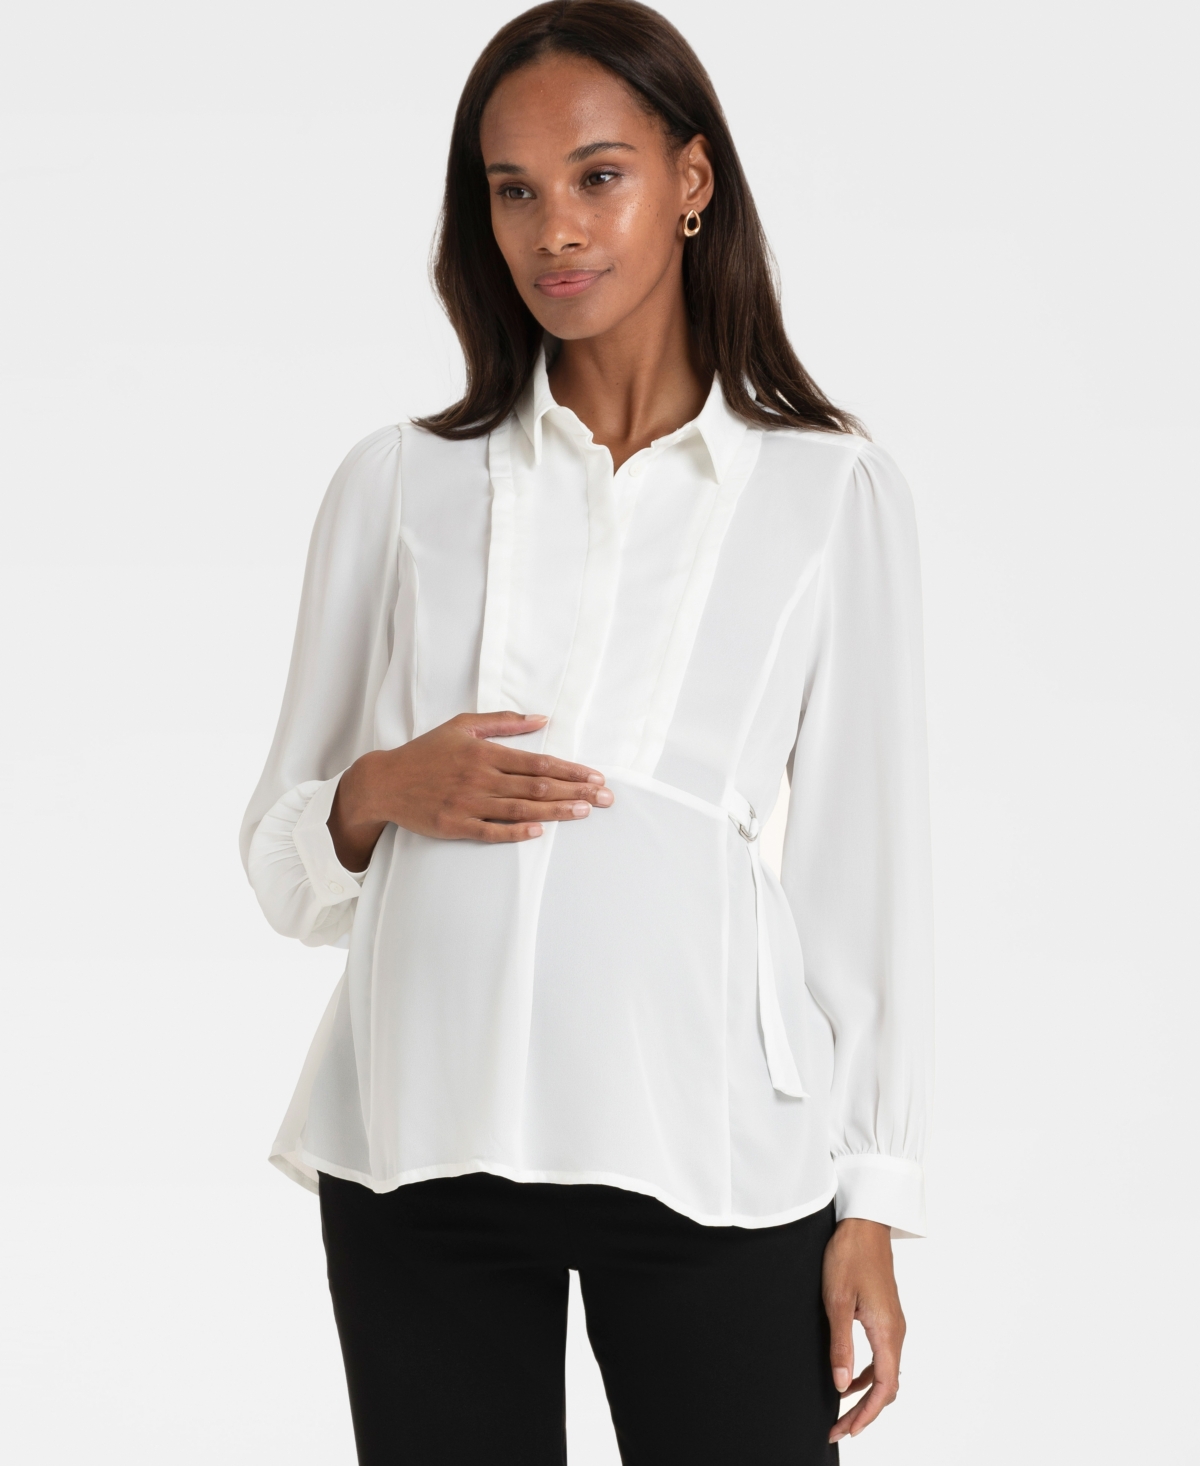 Seraphine Women's Maternity, Nursing And Pumping Blouse In Ivory